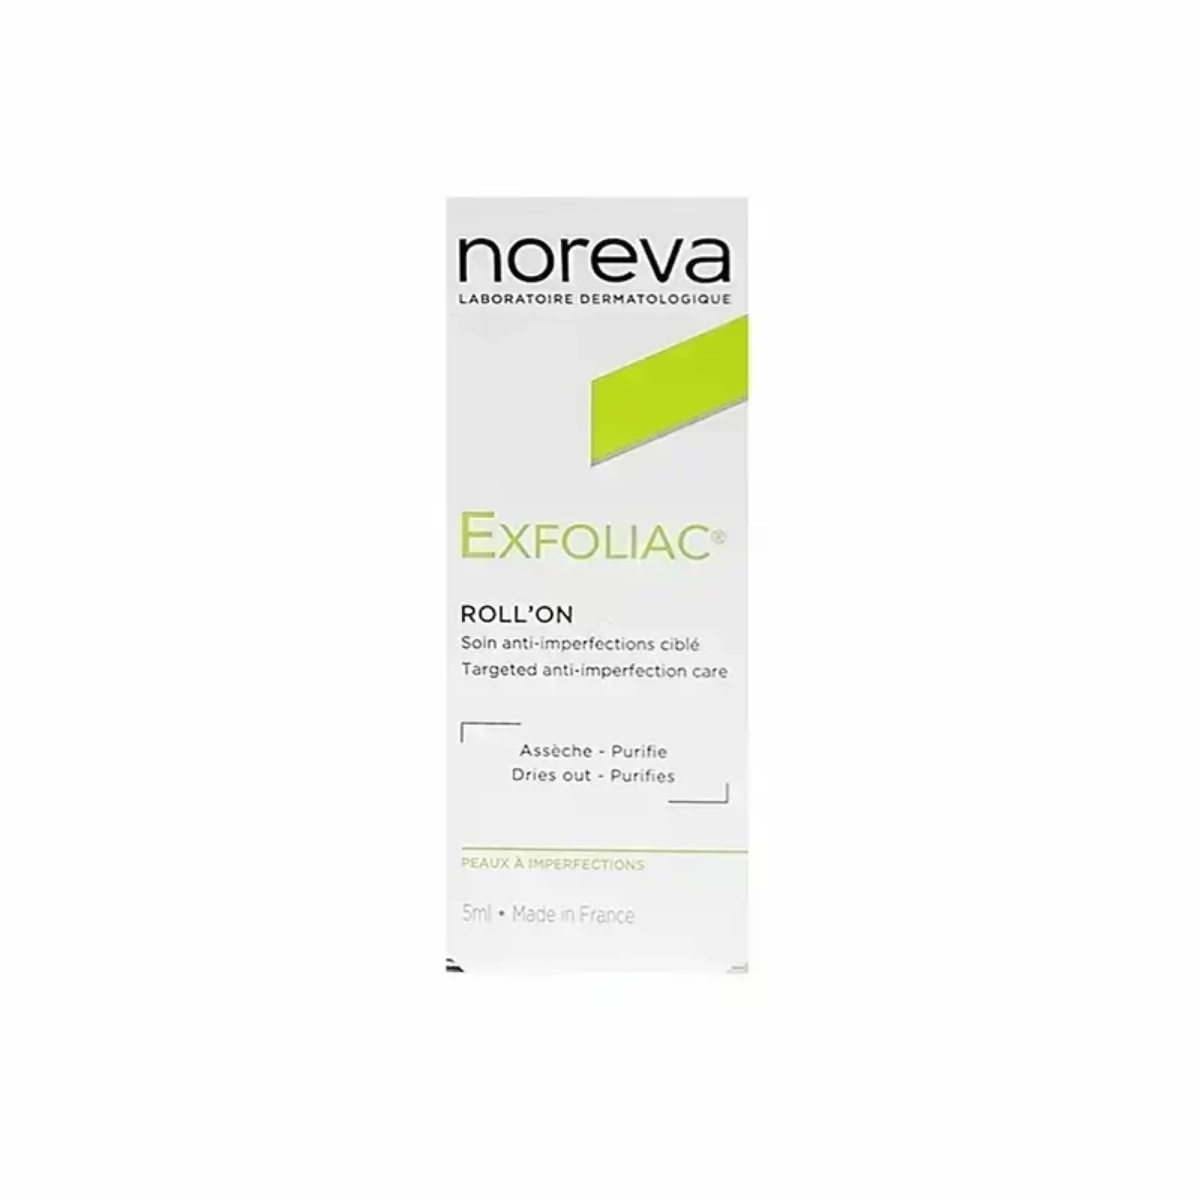 Noreva USA - Shop Online - Care to Beauty